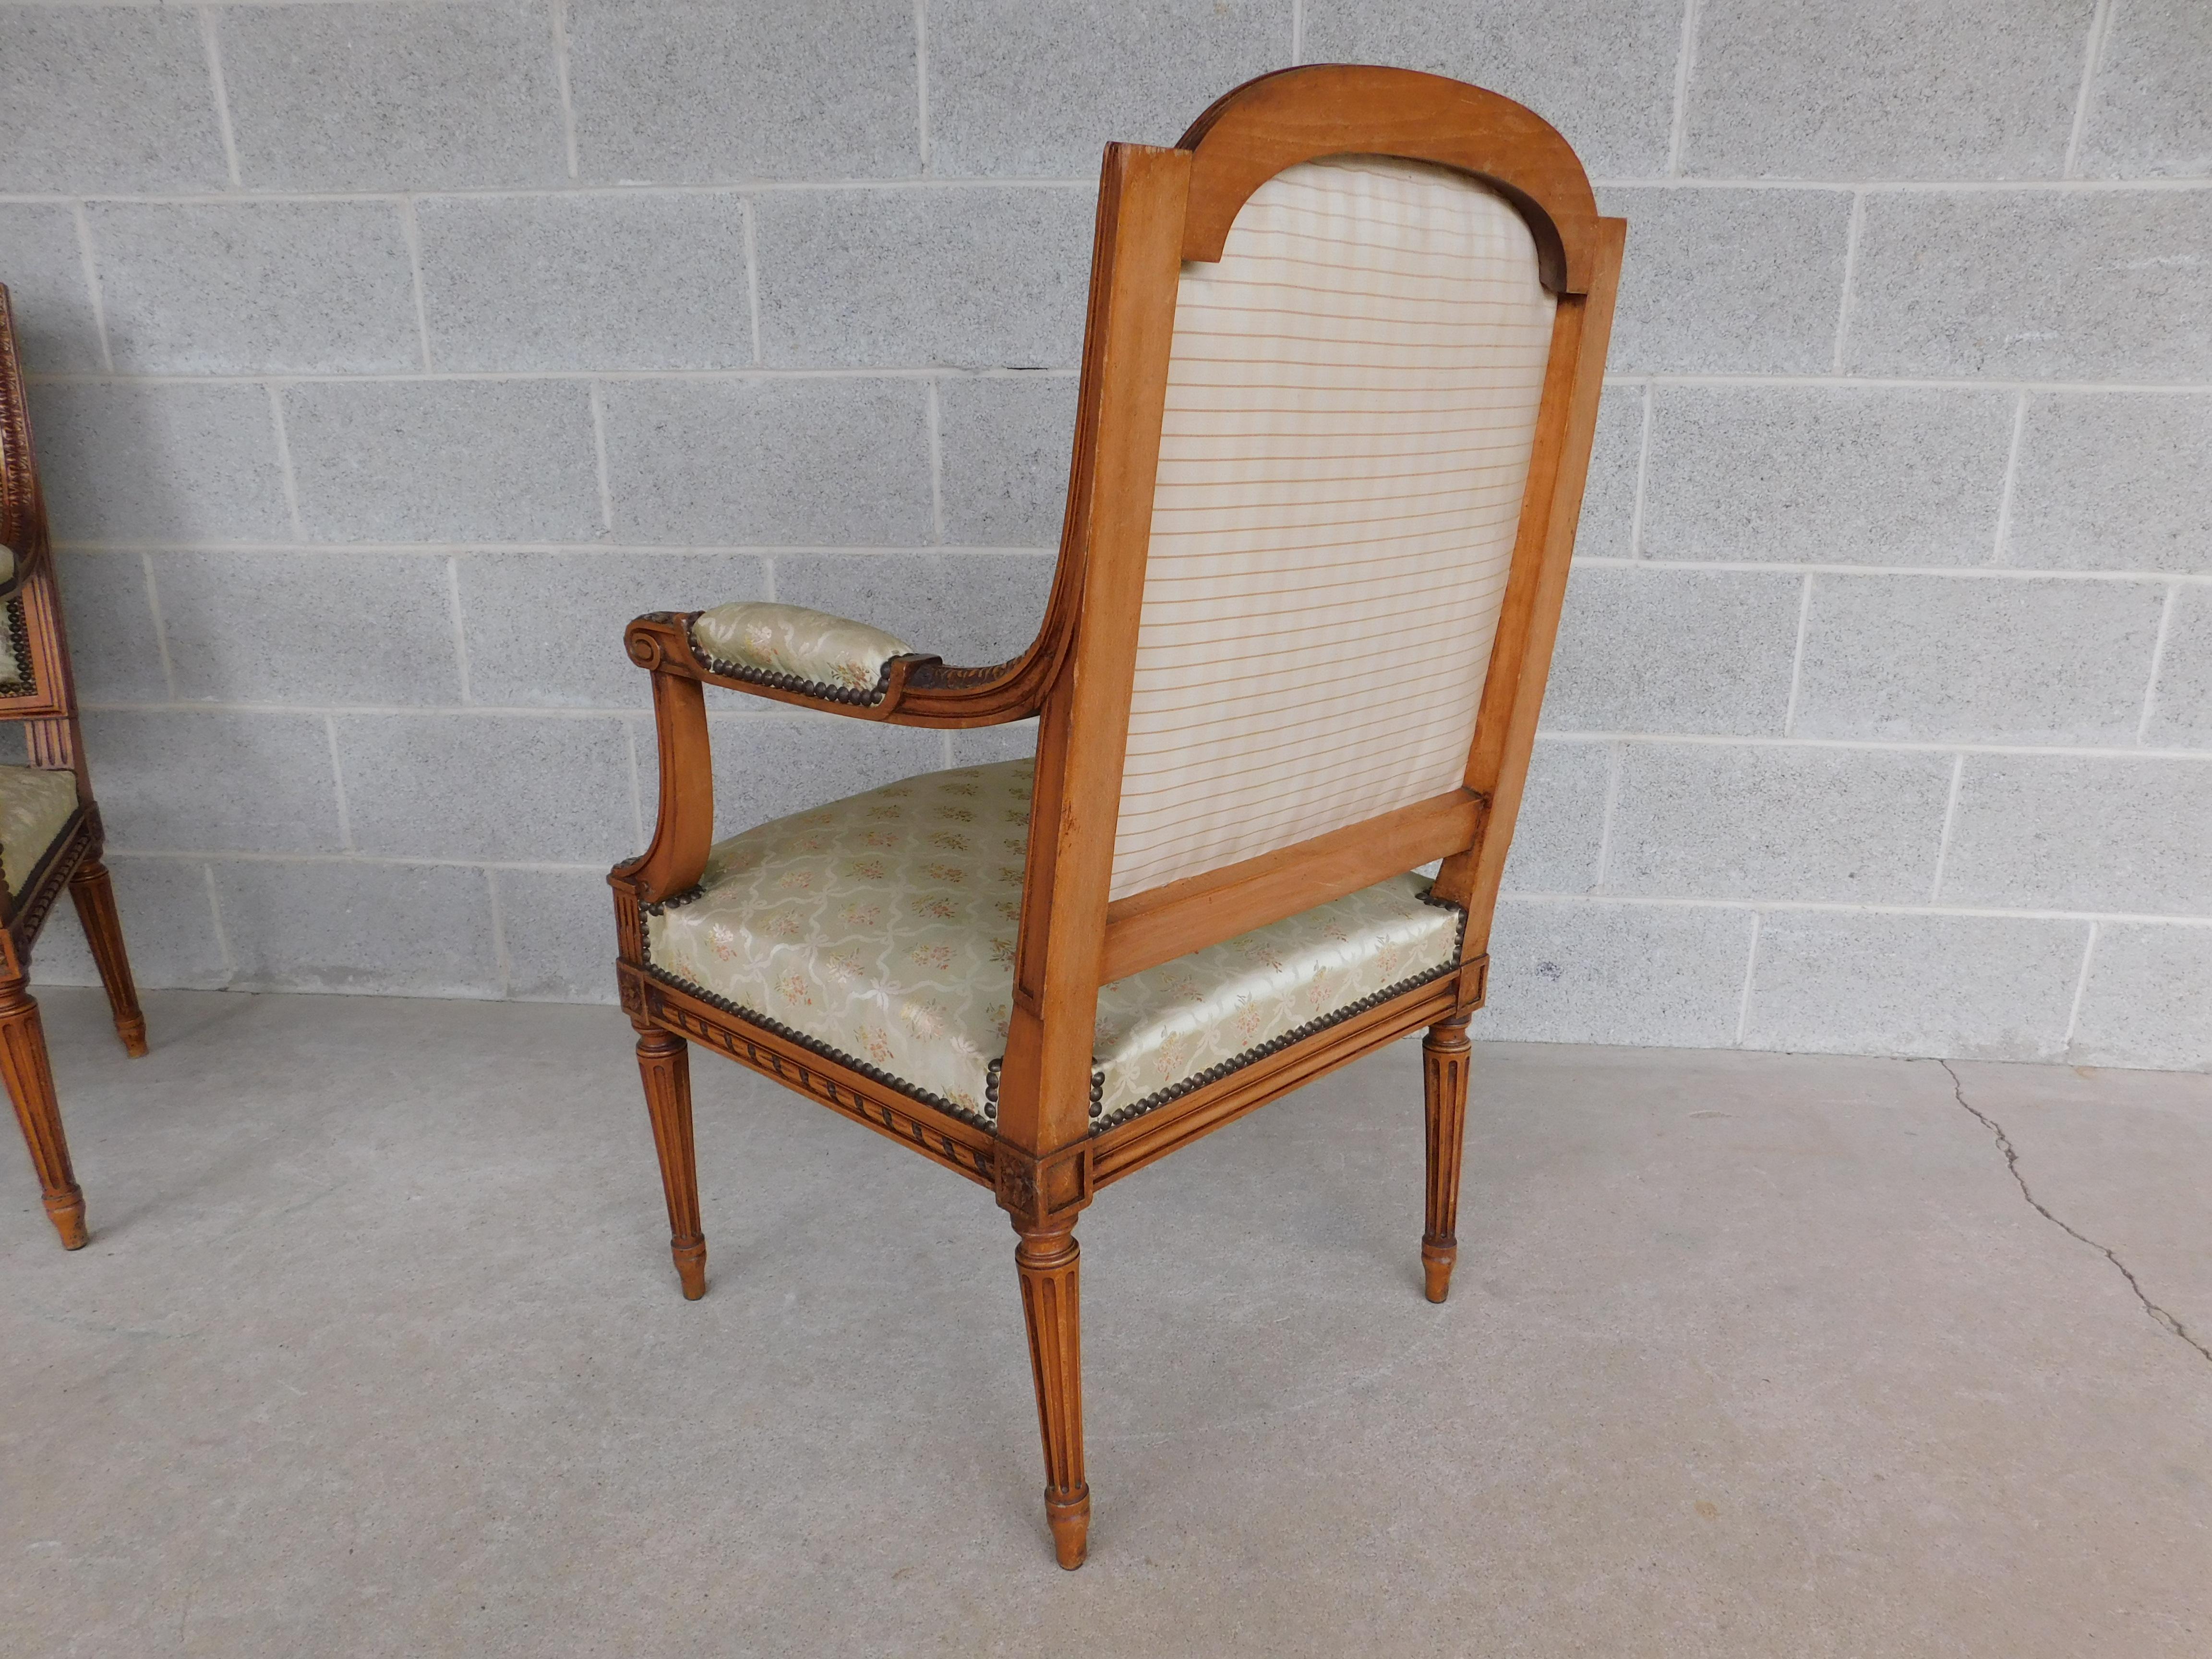 Antique French Louis XVI Style Fauteuil Chairs Late 19th Century, a Pair For Sale 9